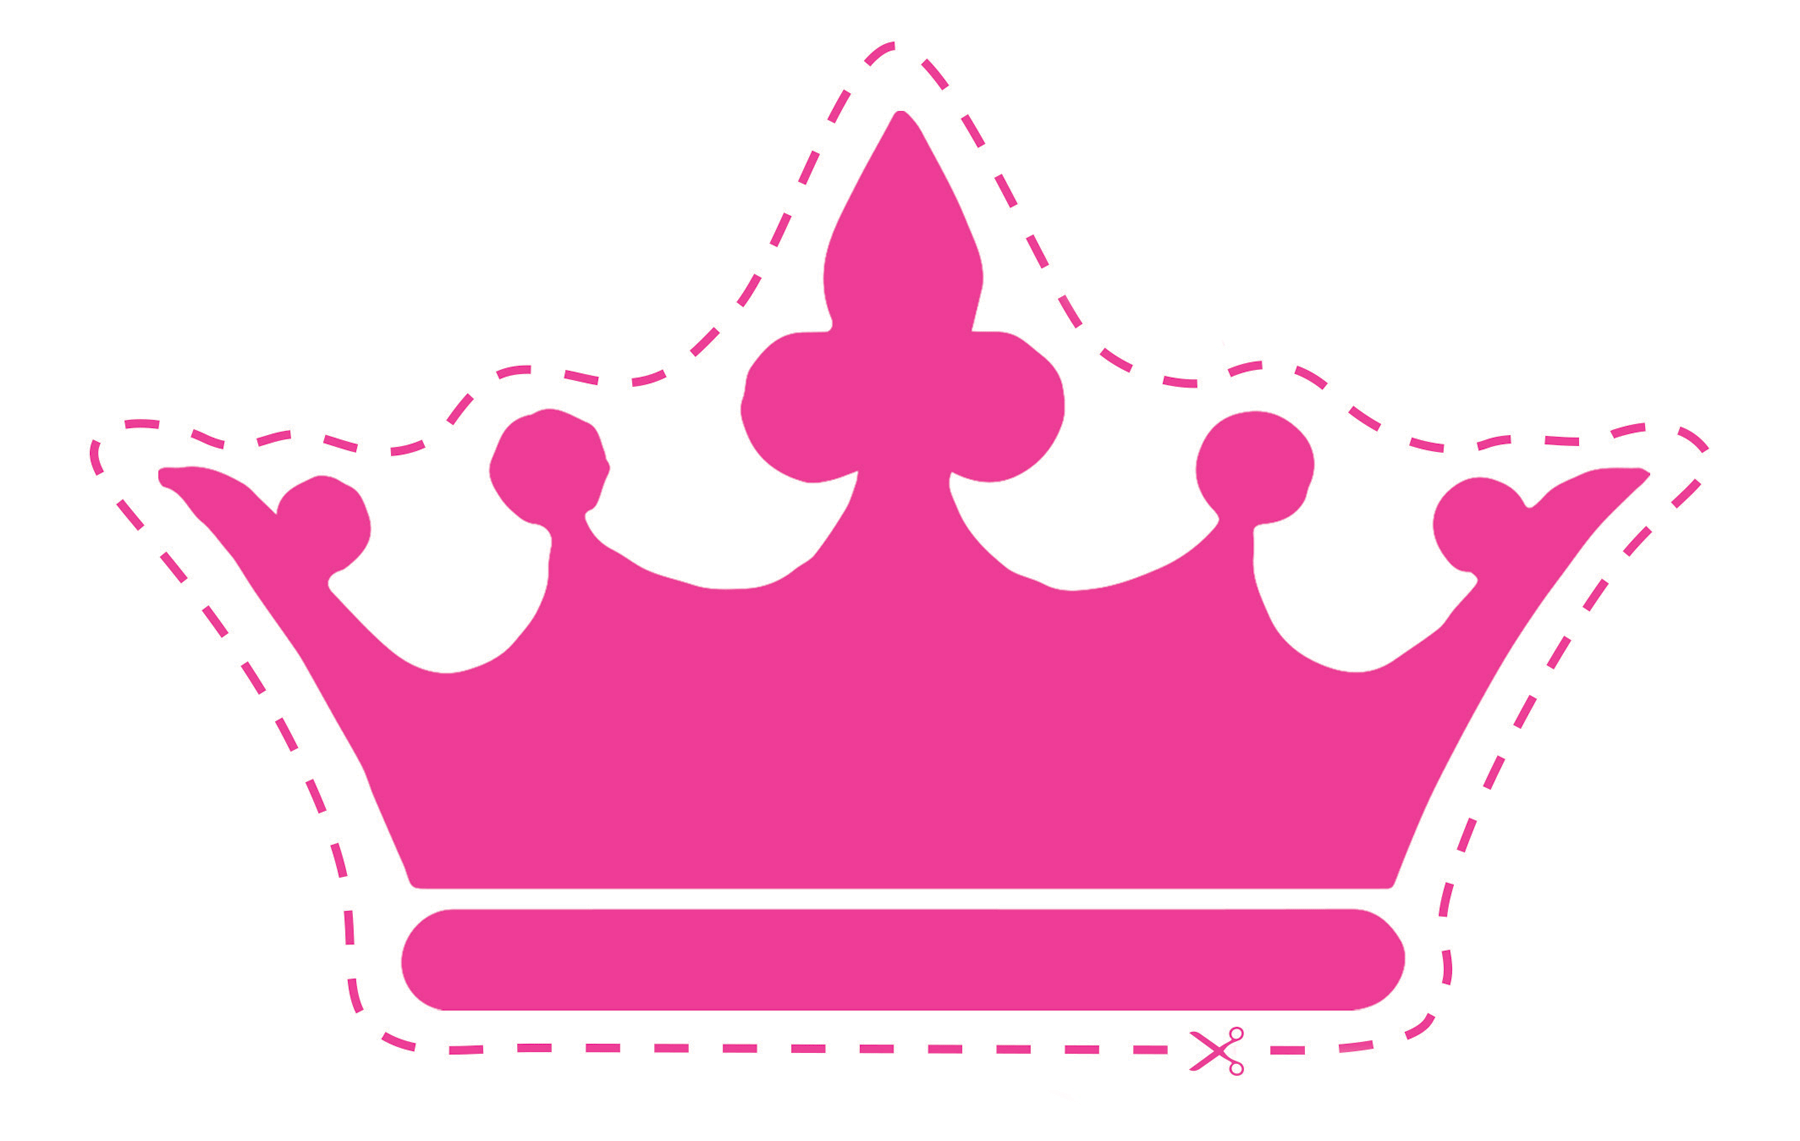 10-best-images-of-cut-out-crowns-and-tiaras-queen-crown-template